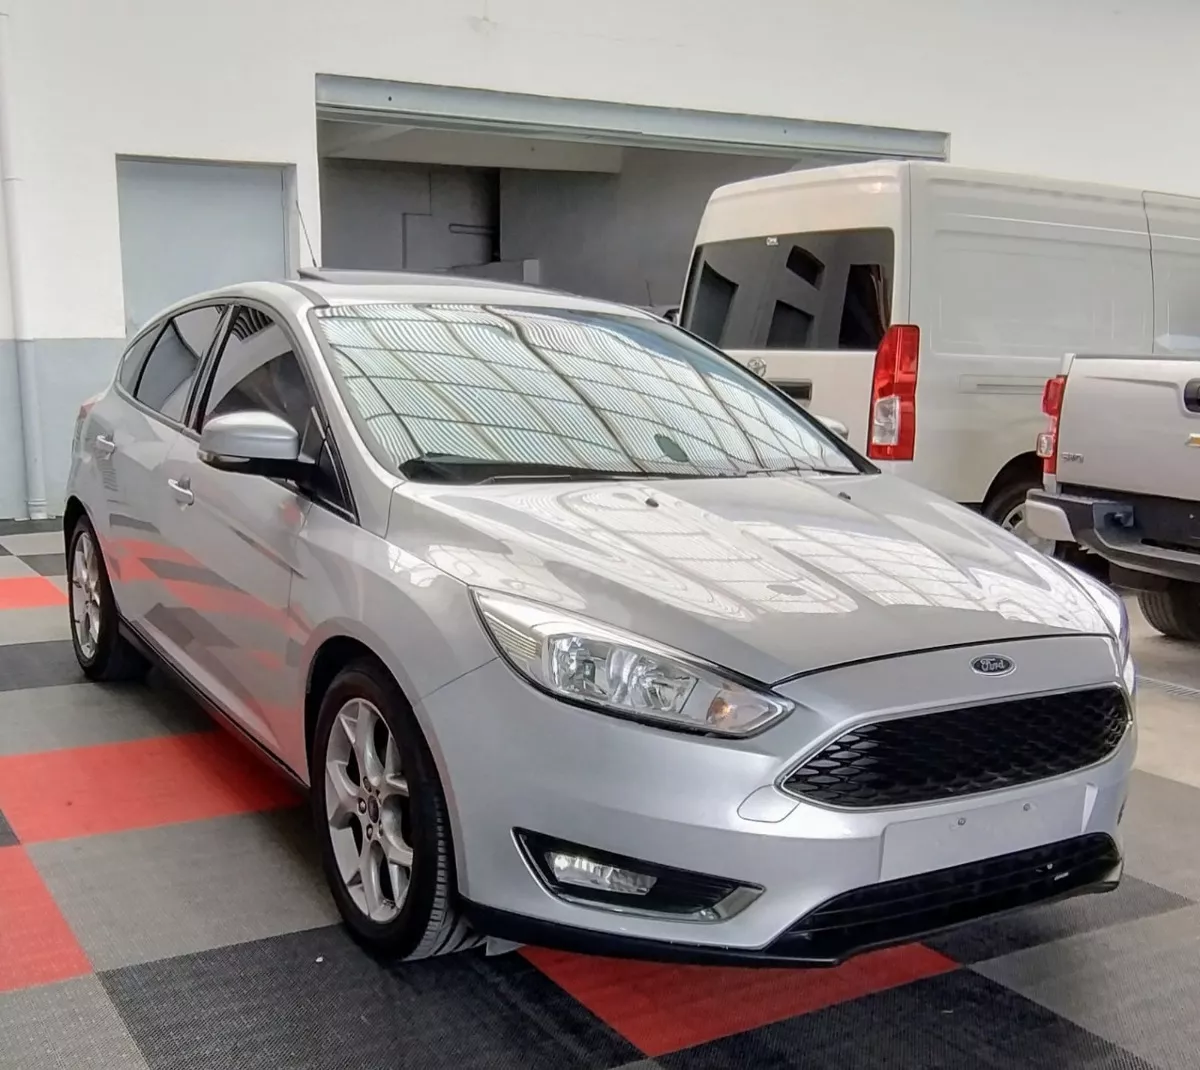 Ford Focus 2.0l N At Se Plus 2015 Automotores Gps